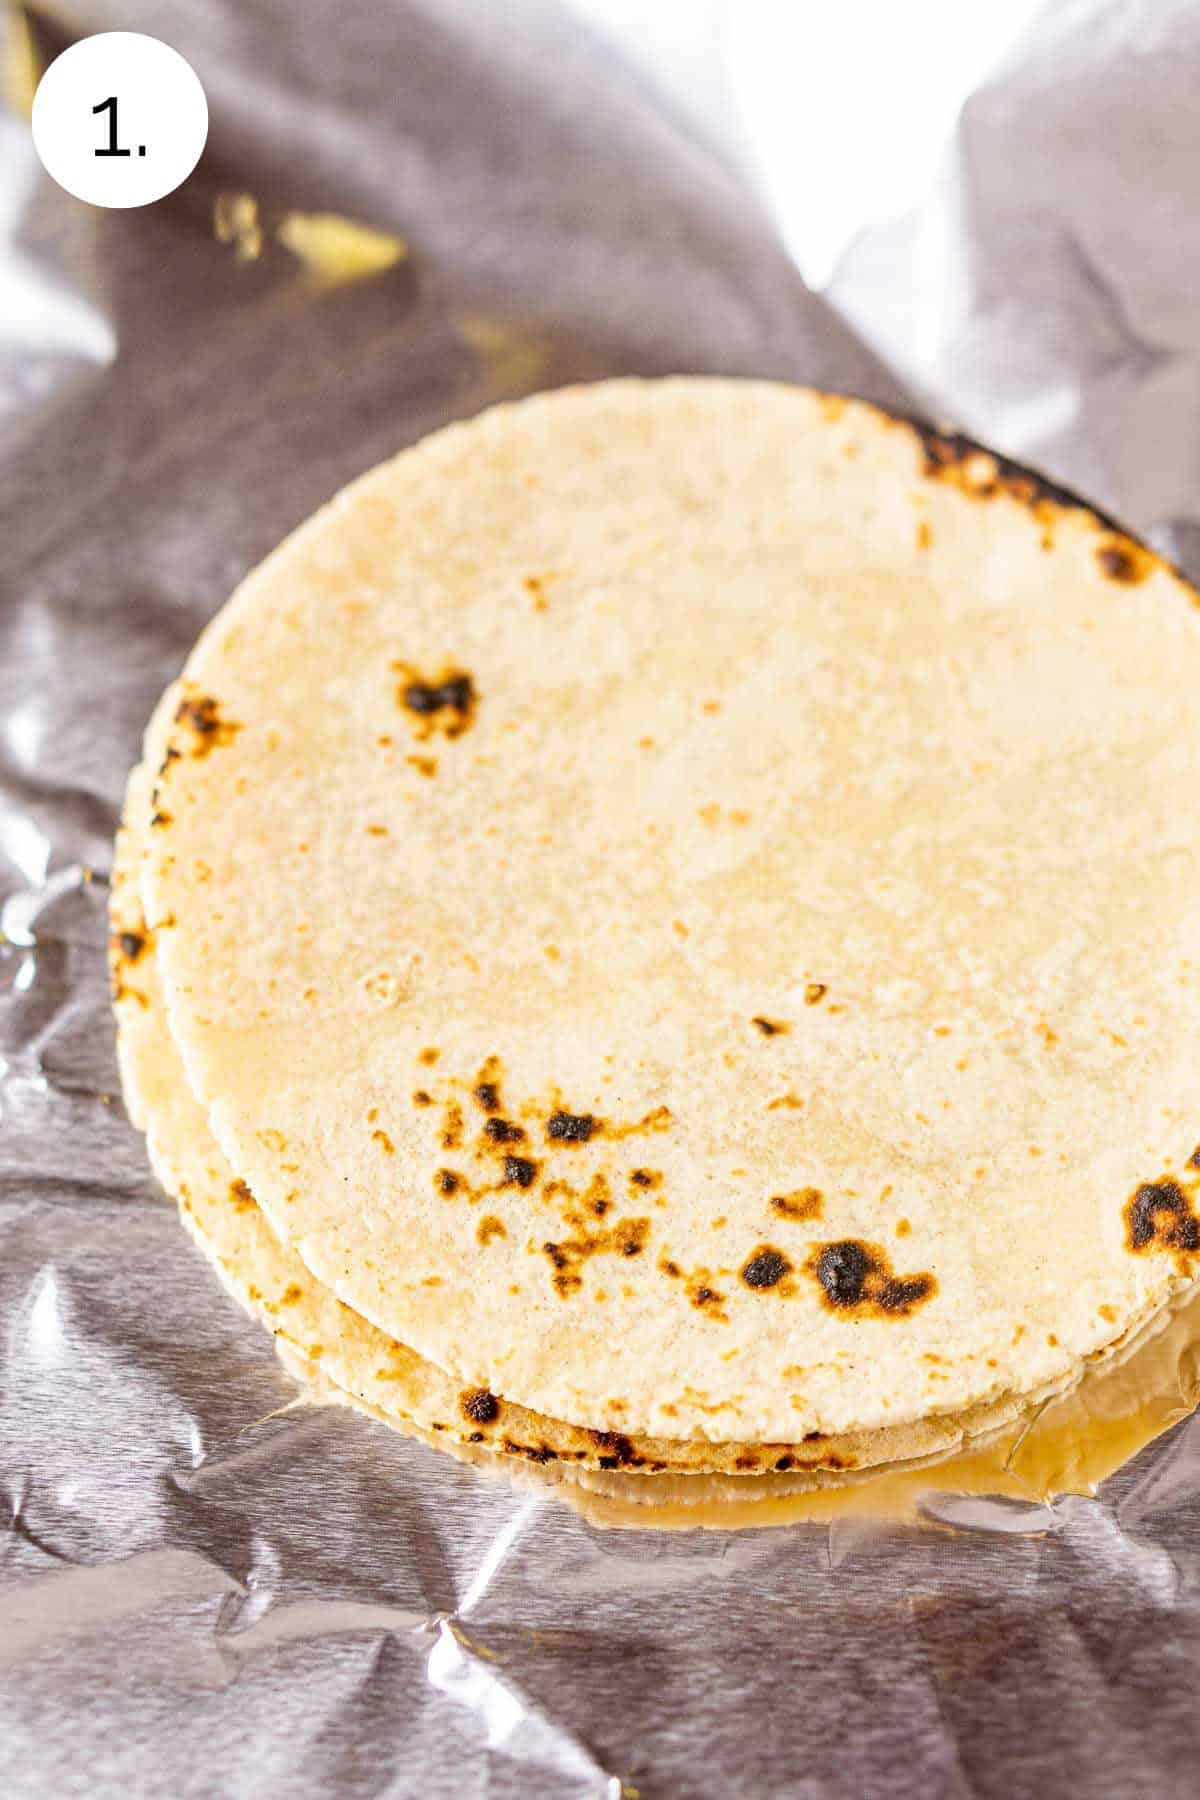 A stack of tortillas on aluminum foil before wrapping and warming in the oven.